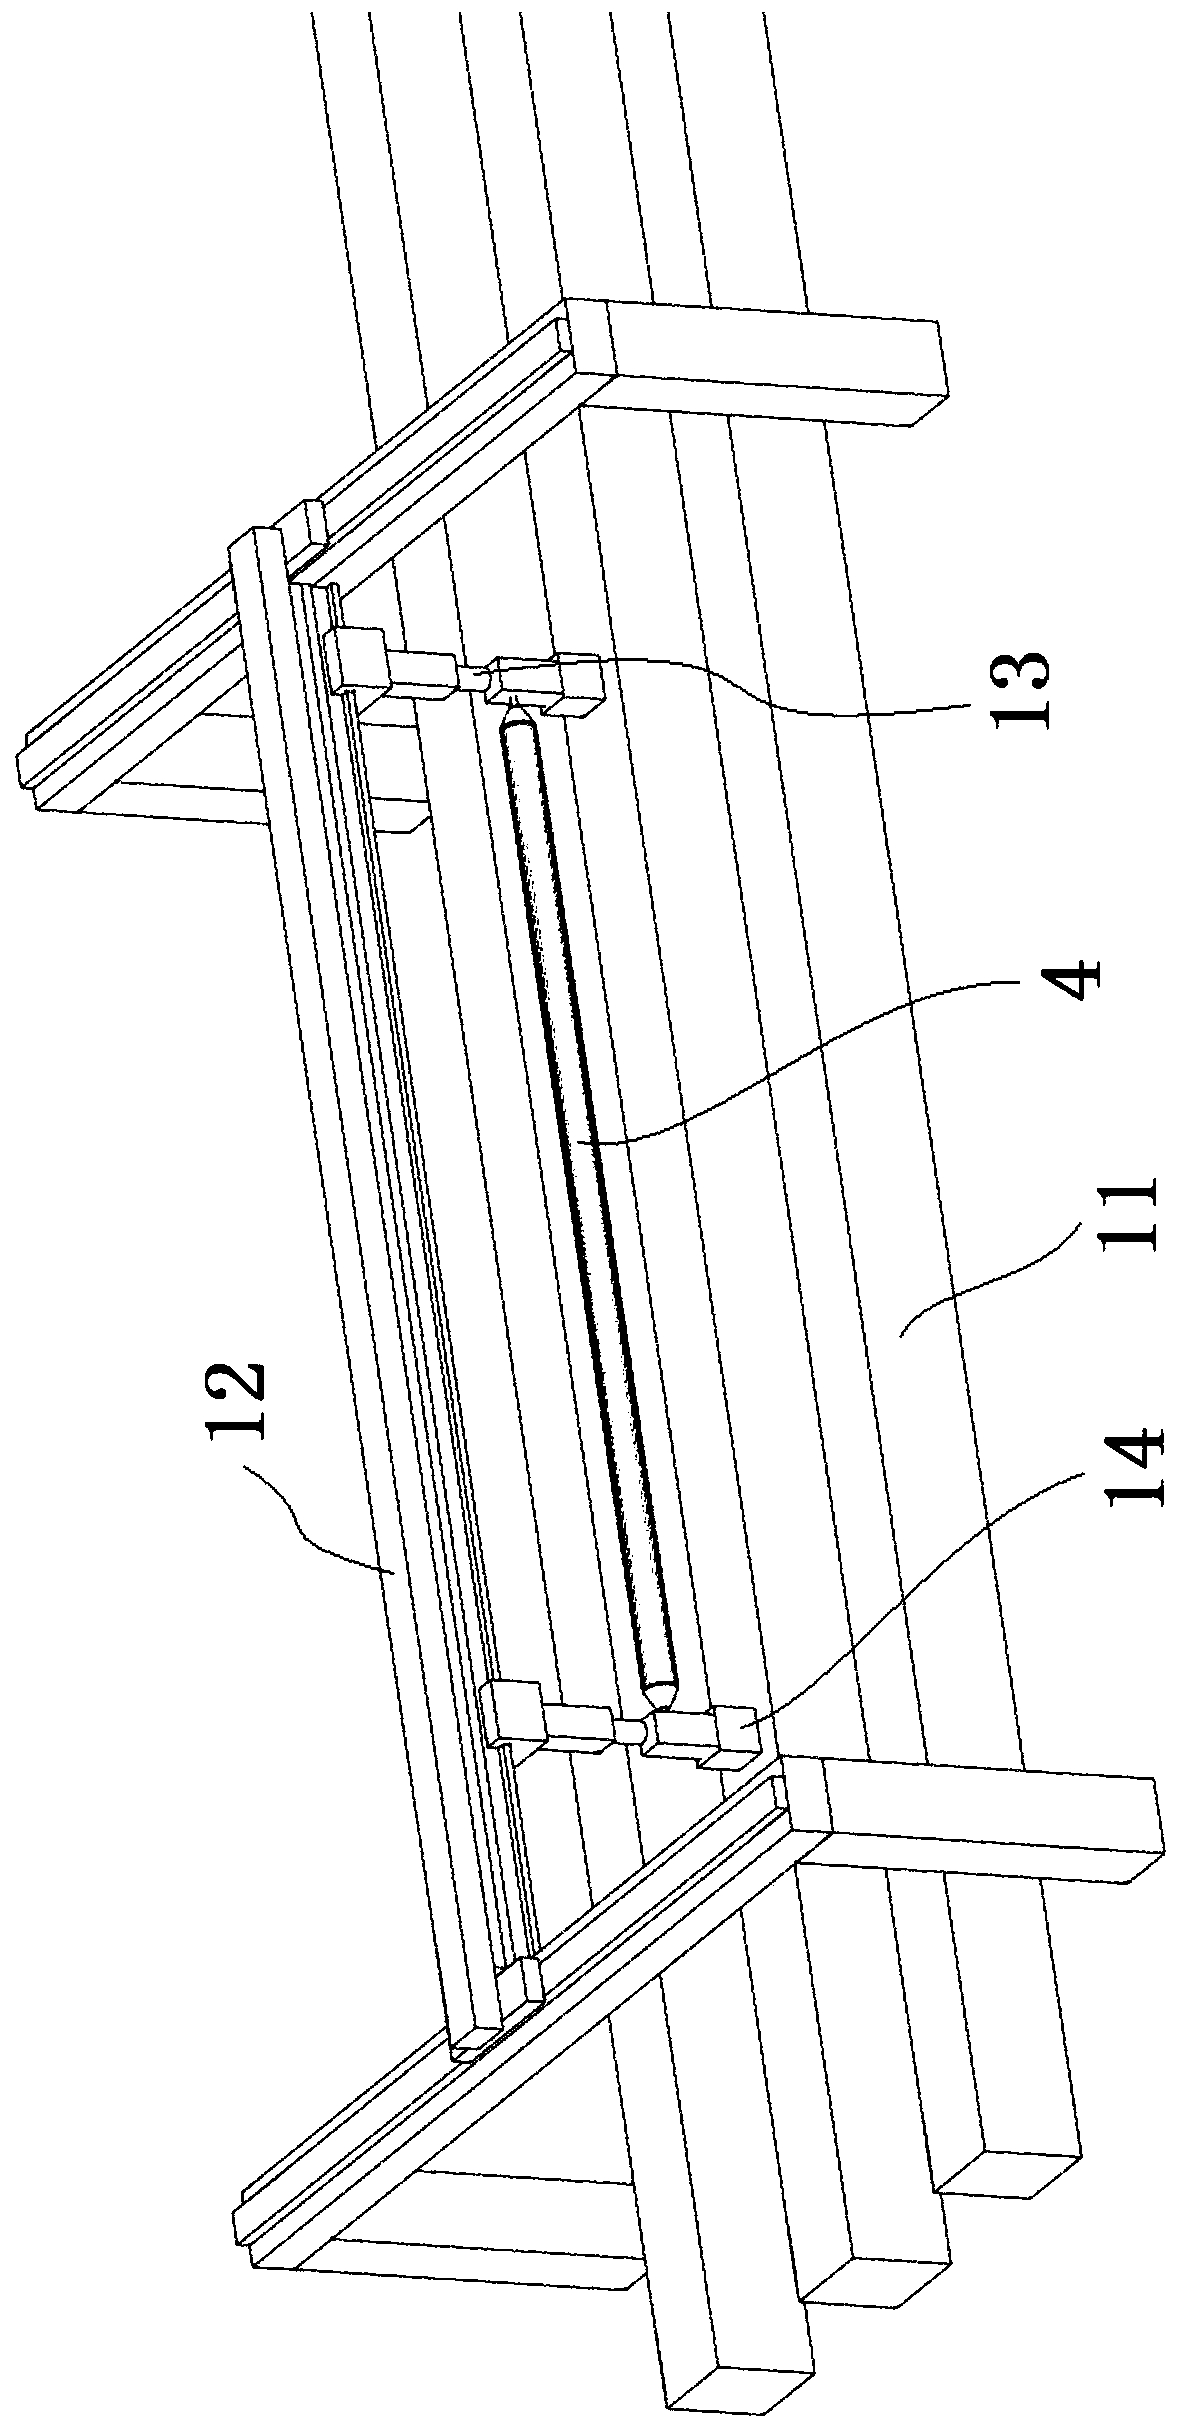 Spraying method of automatic spraying unit for thin-long structure work piece